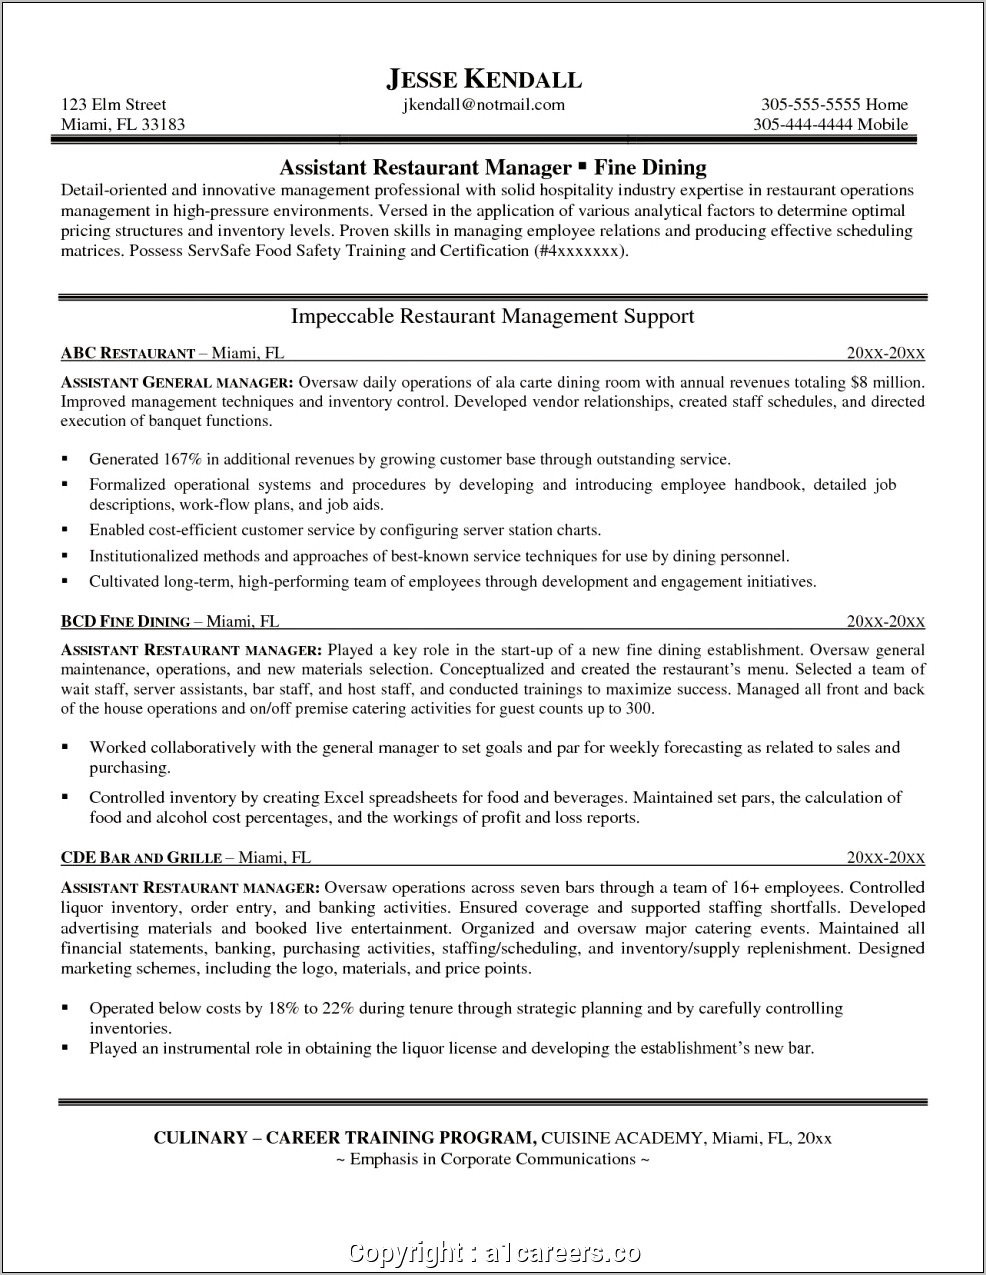 Restaurant Purchasing And Inventory Manager Resume